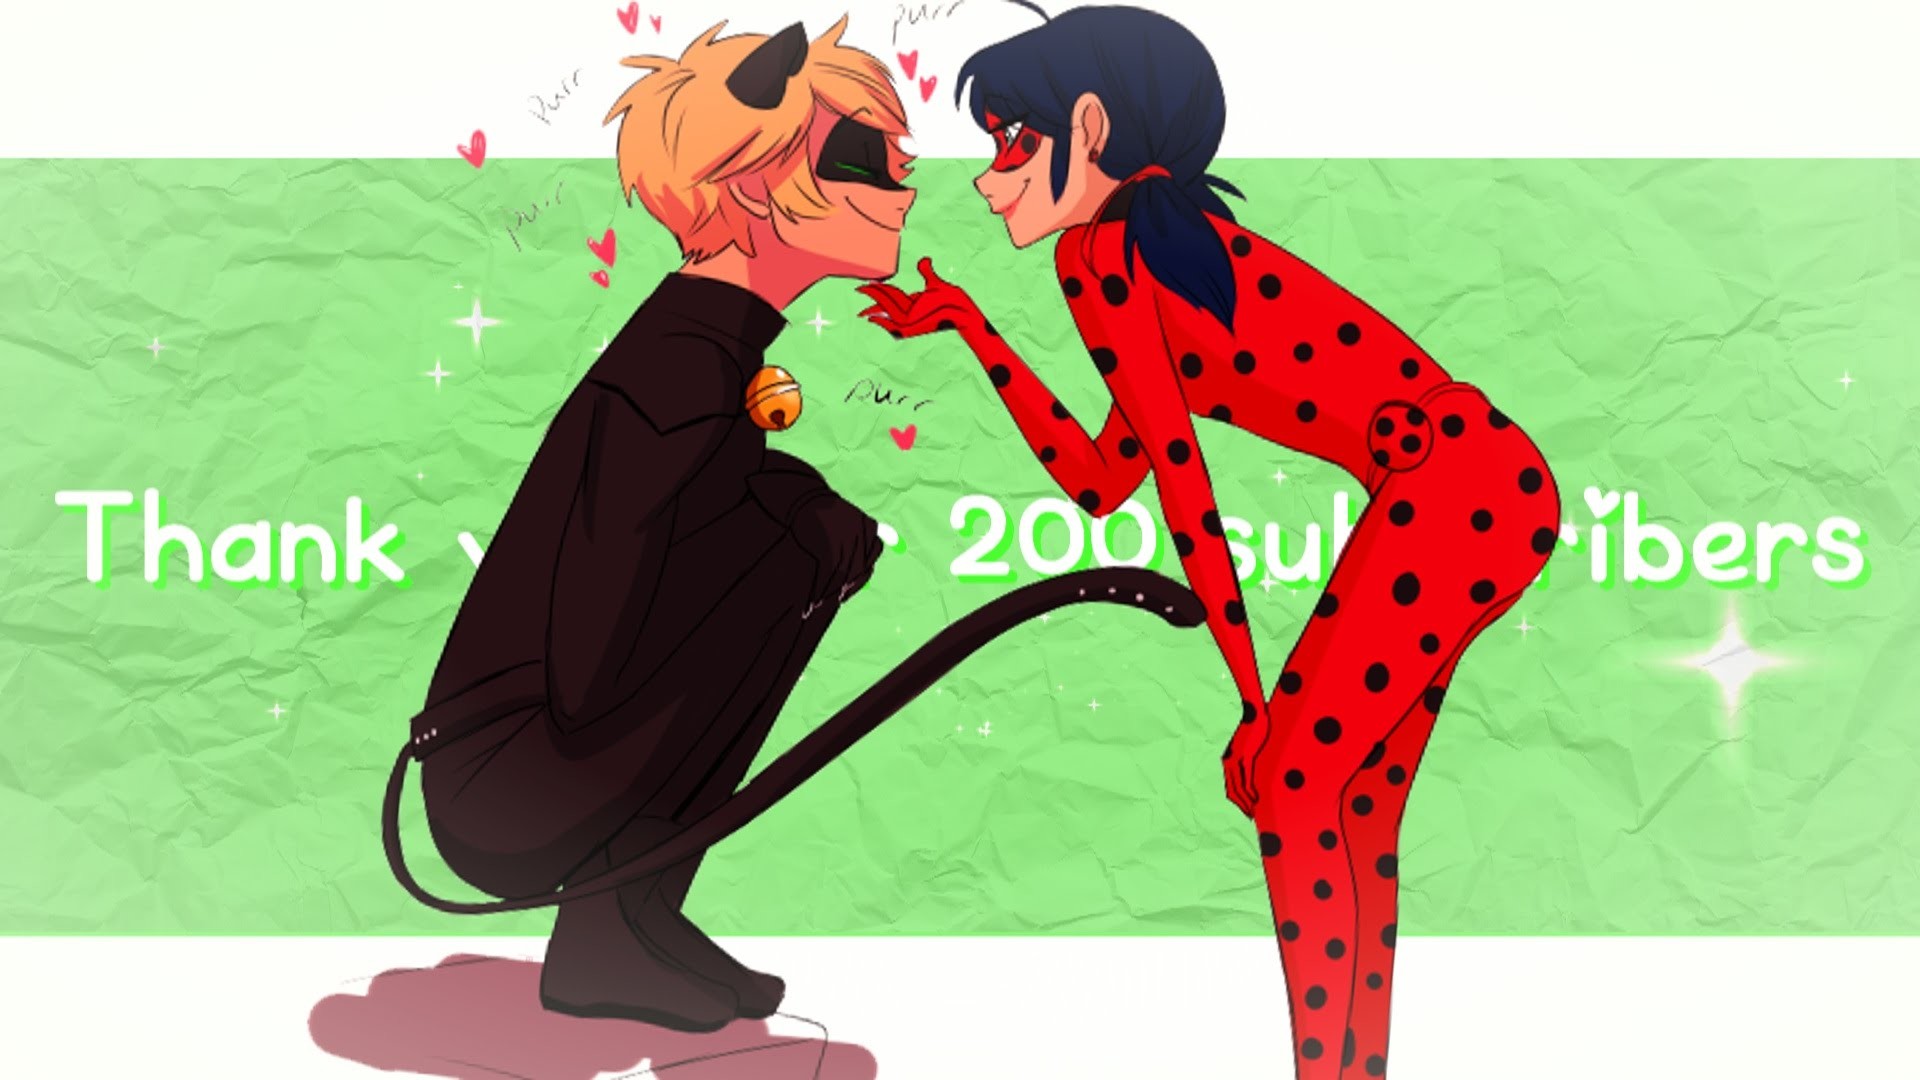 Miraculous Chat noir x Ladybug / / / Thank you for 200 subscribers – YouTube